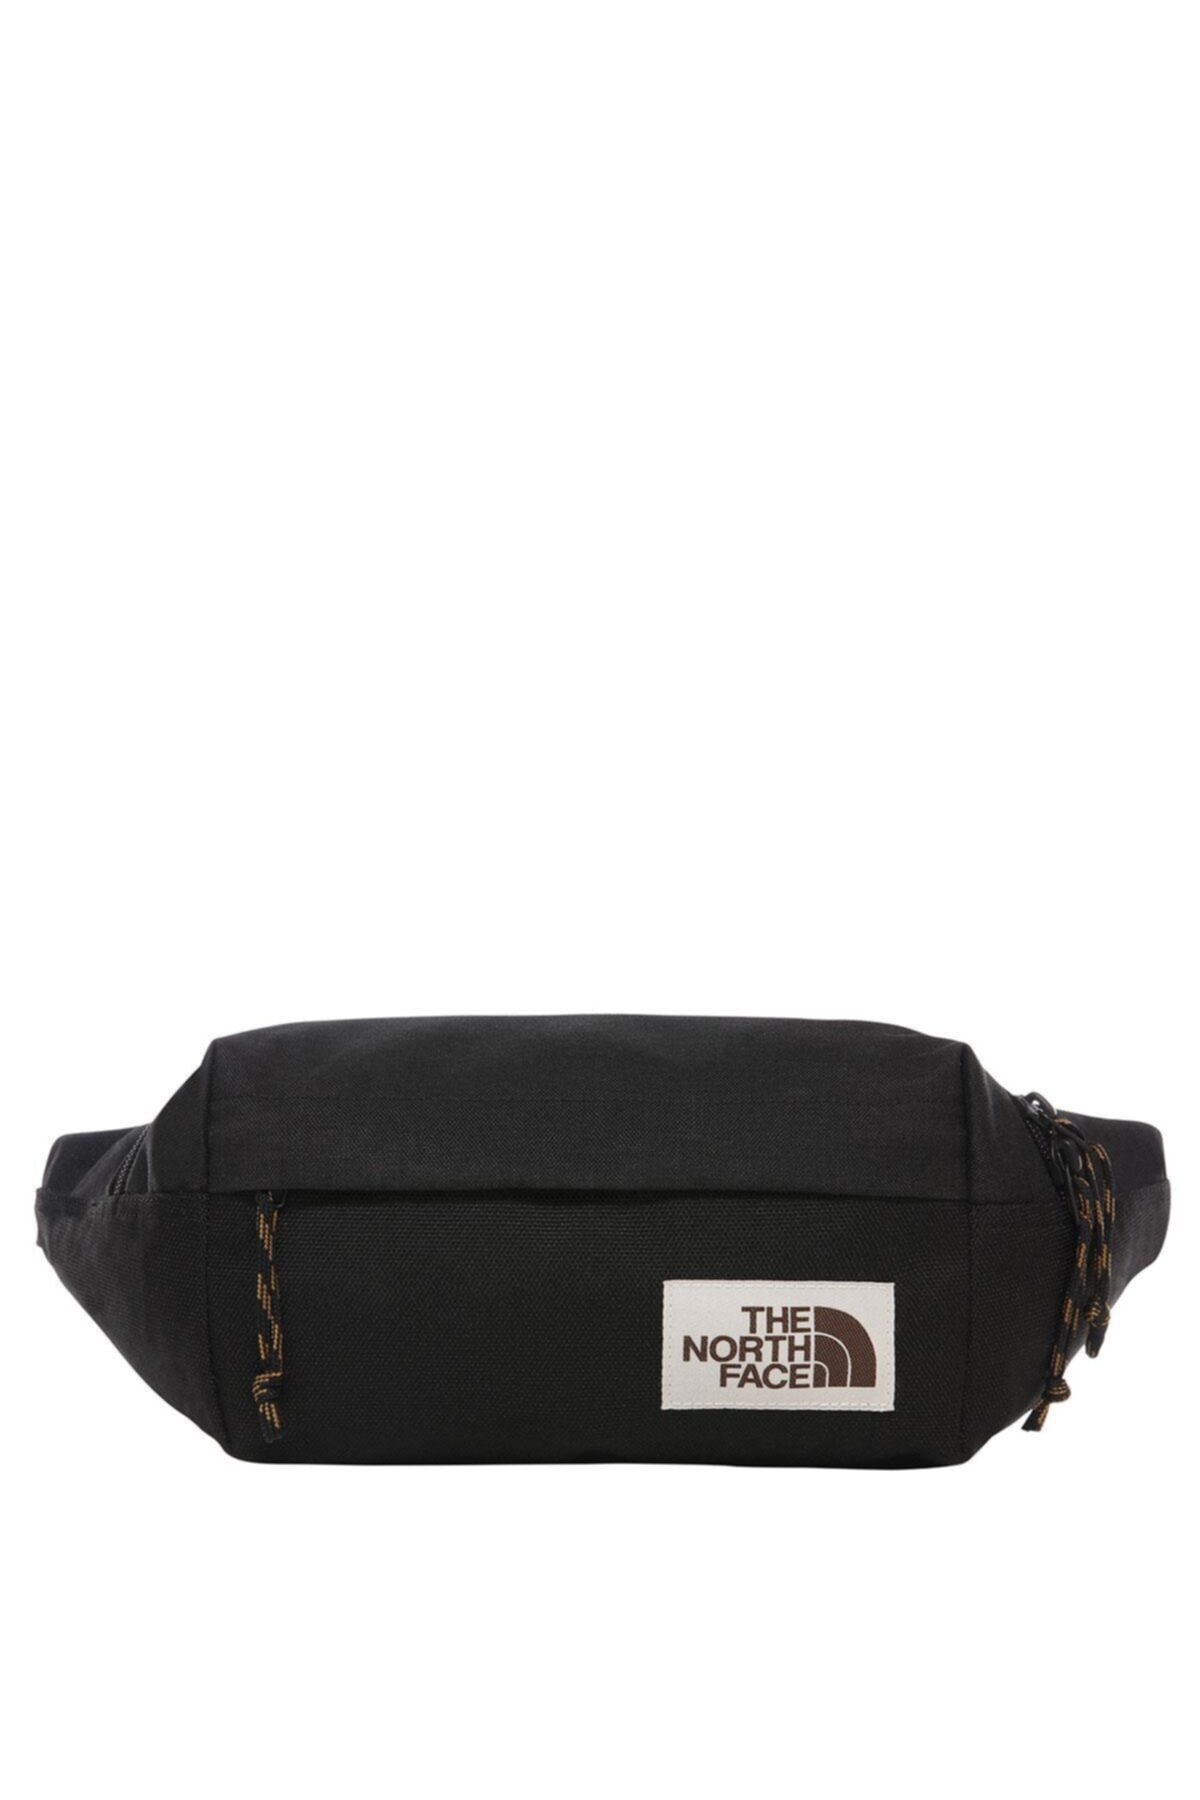 THE NORTH FACE Lumbar Pack Nf0a3ky6ks71